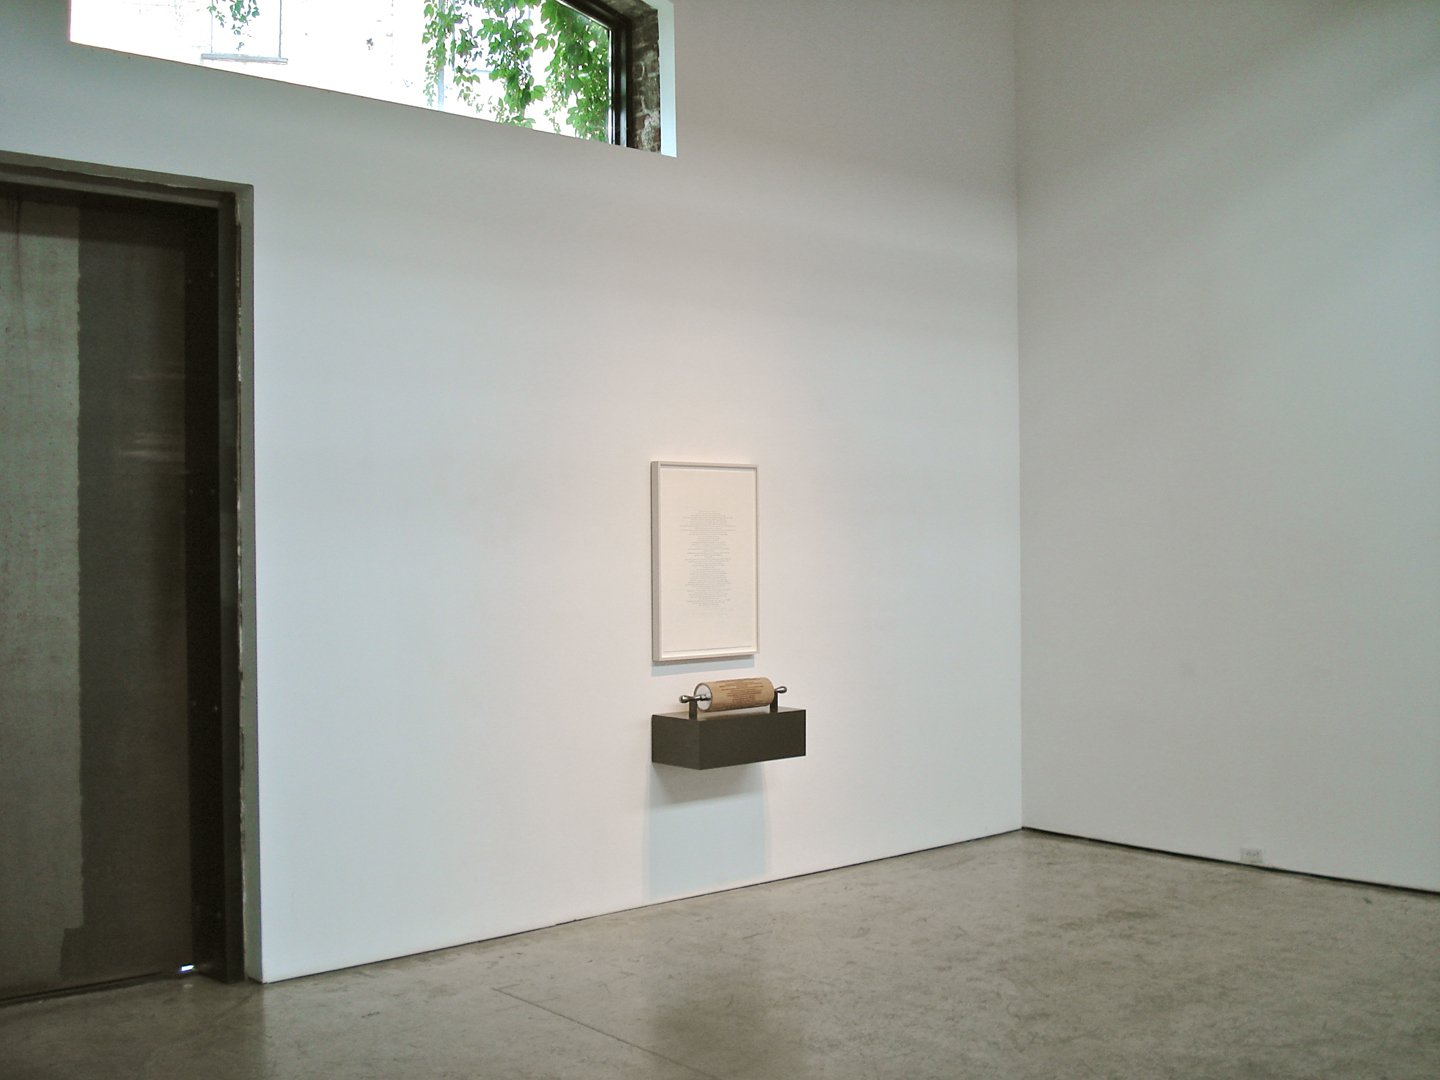 Installation View 1 petits genres 2012